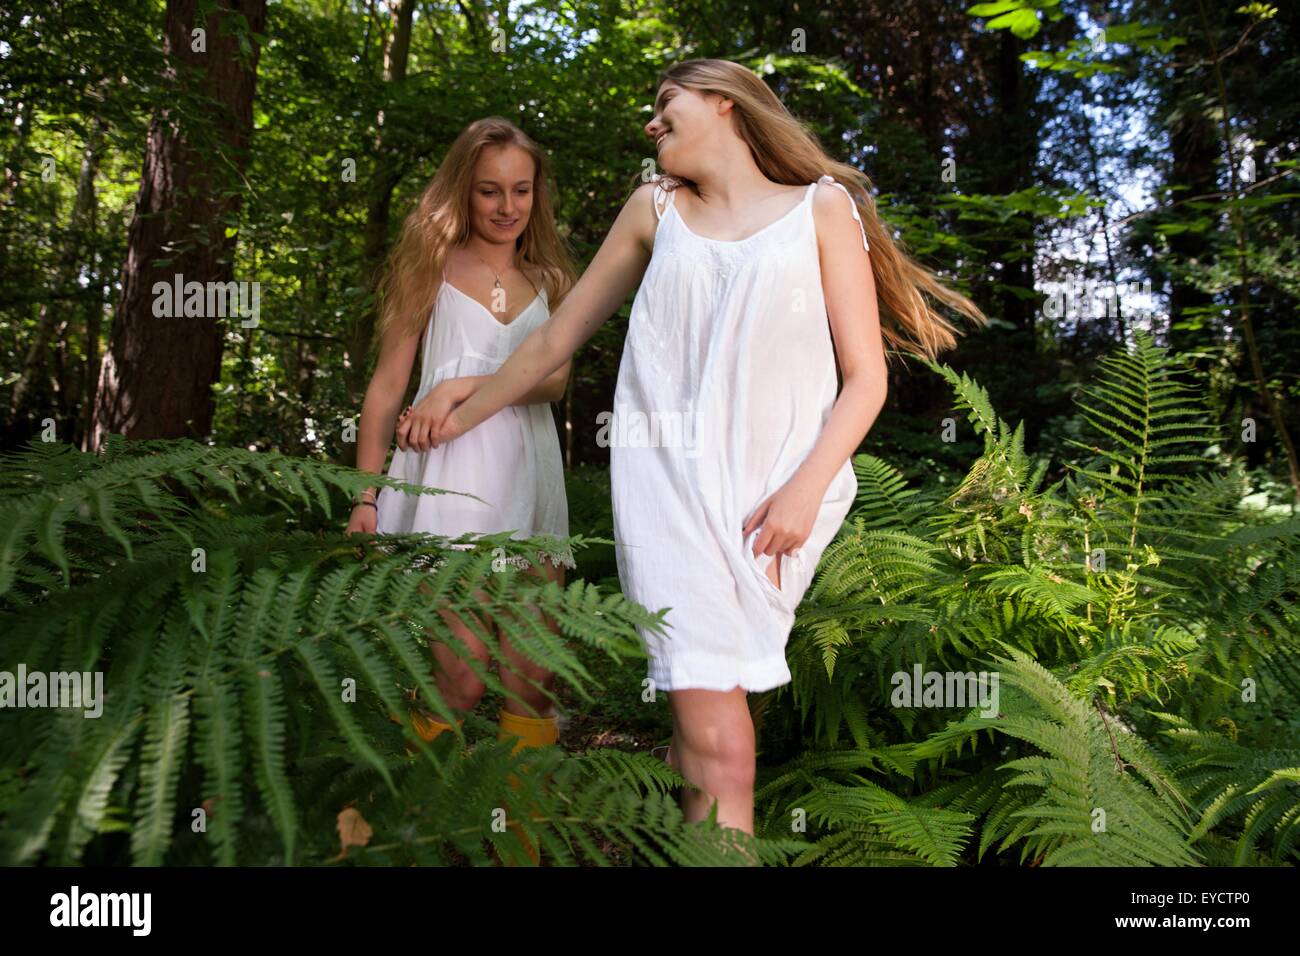 Two teenage girls wandering through forest Stock Photo